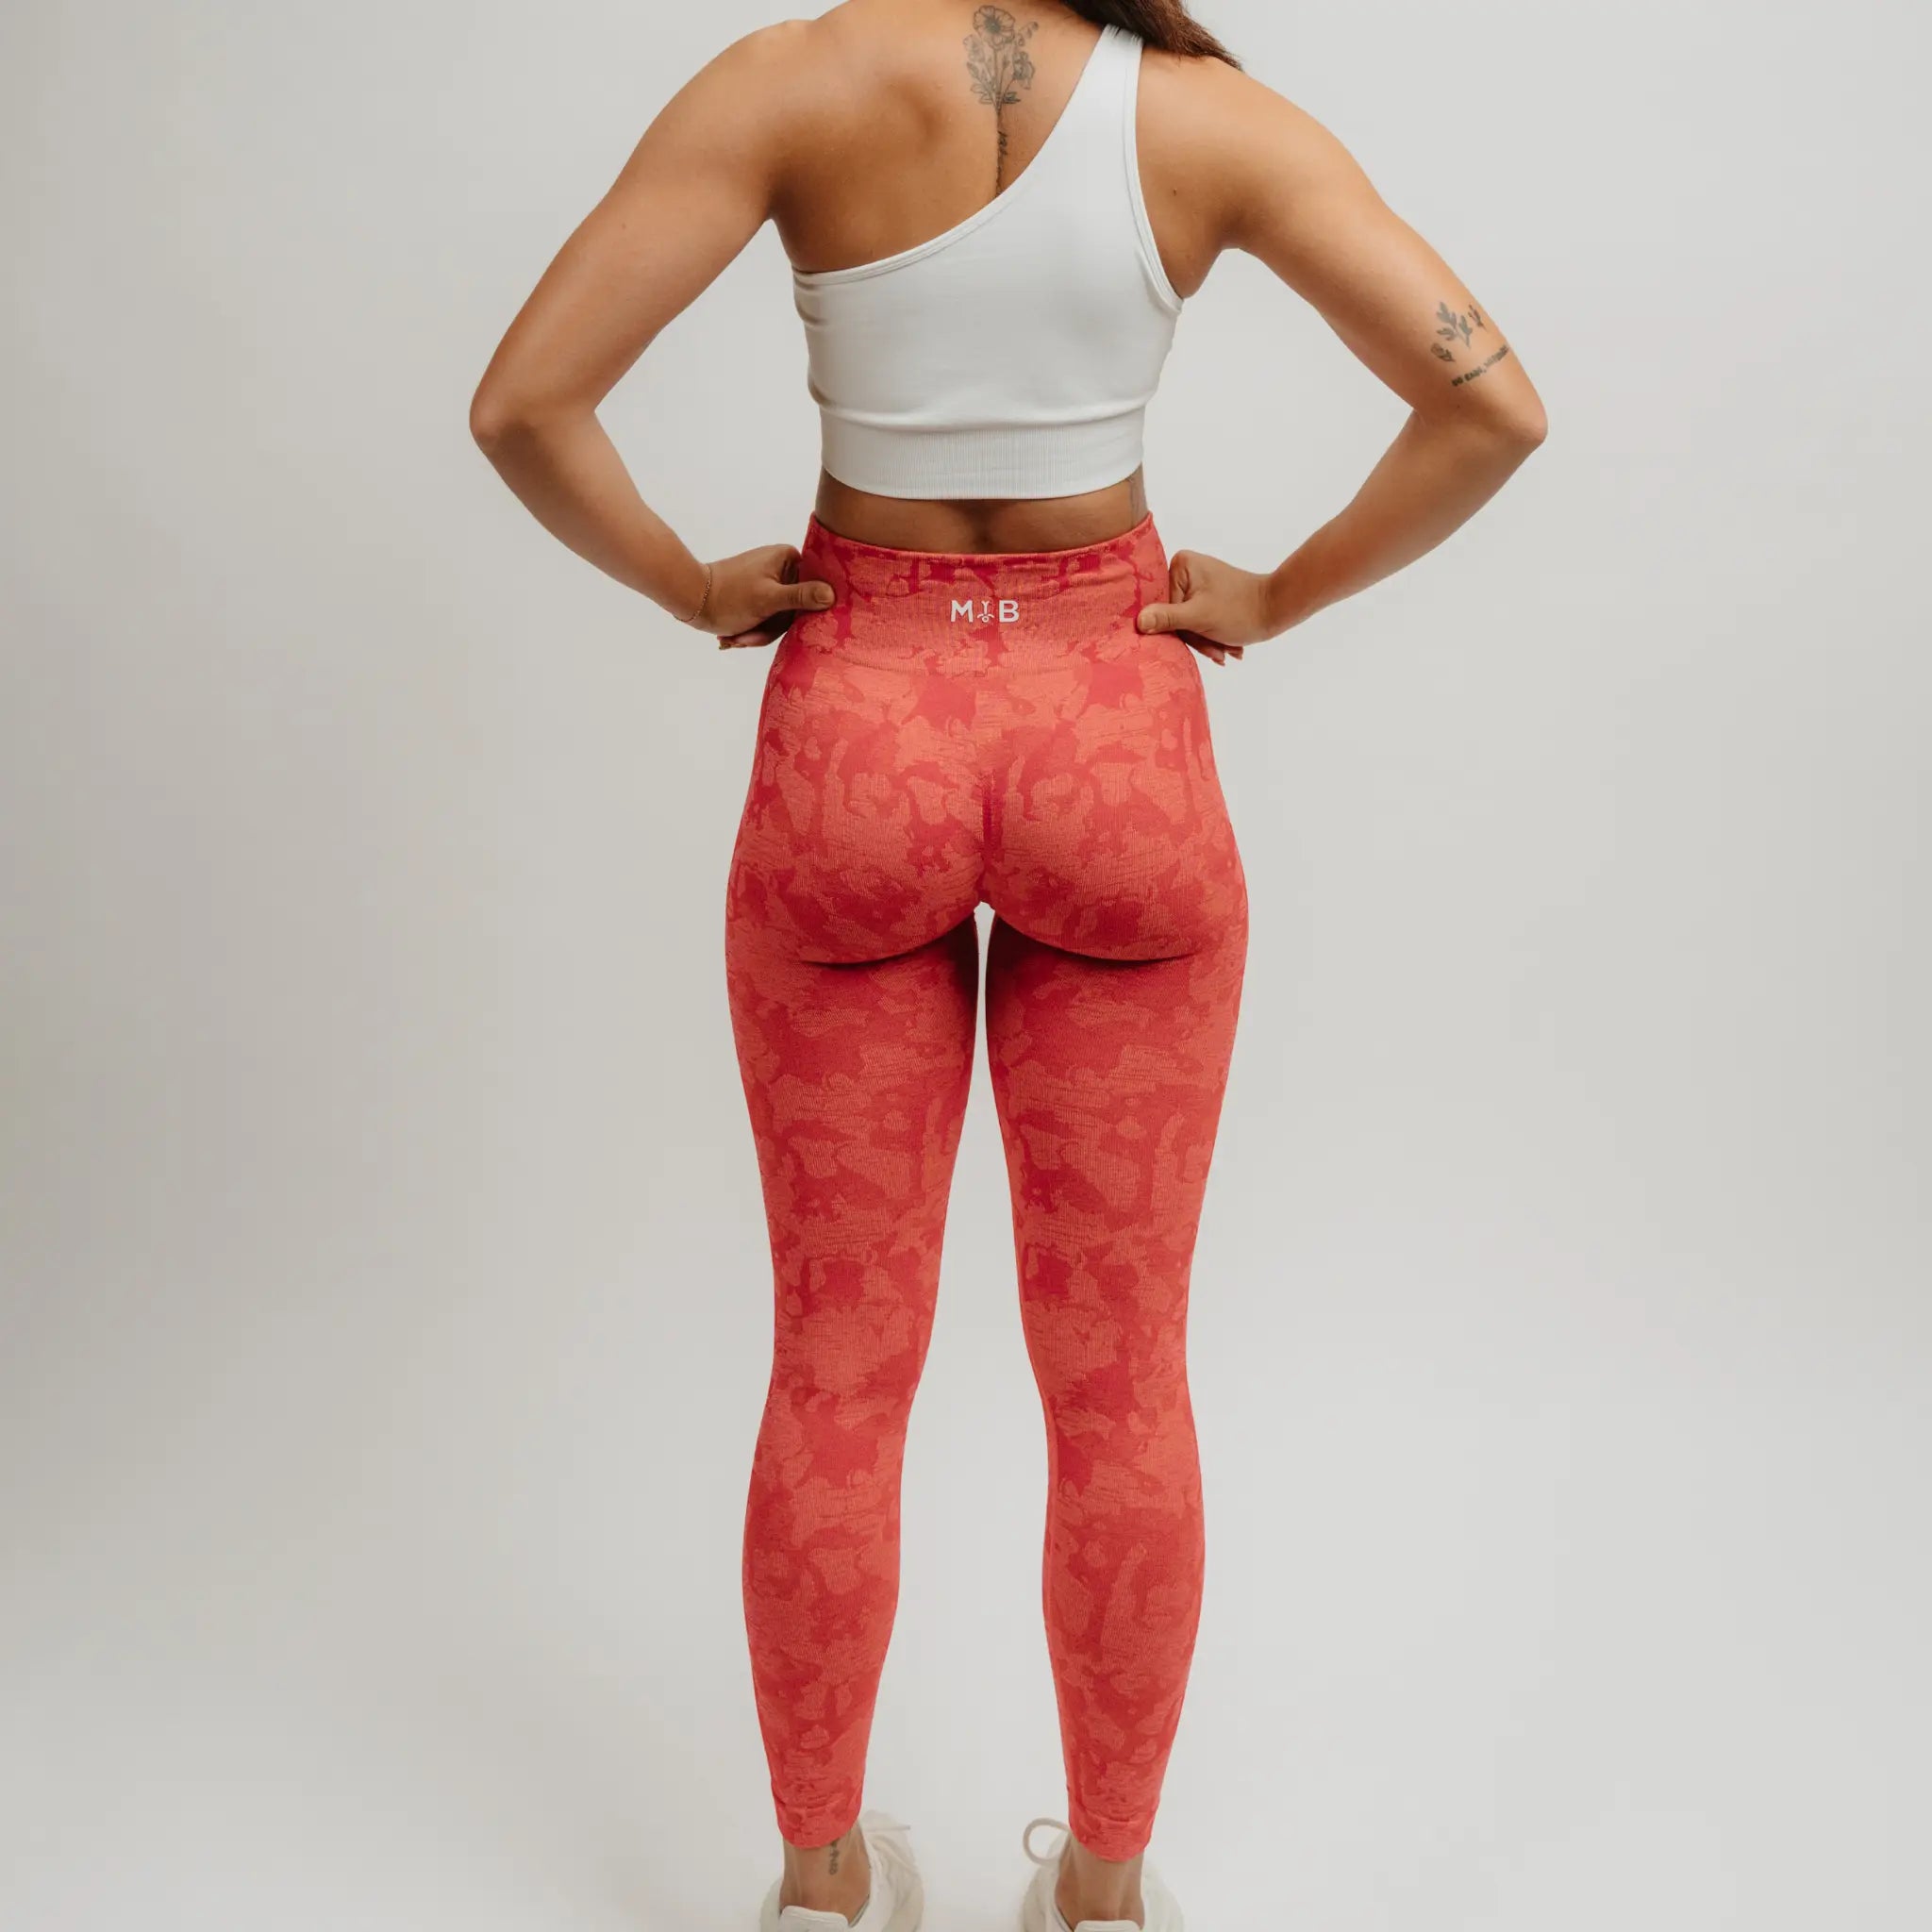 Camo leggings that also have a scrunch